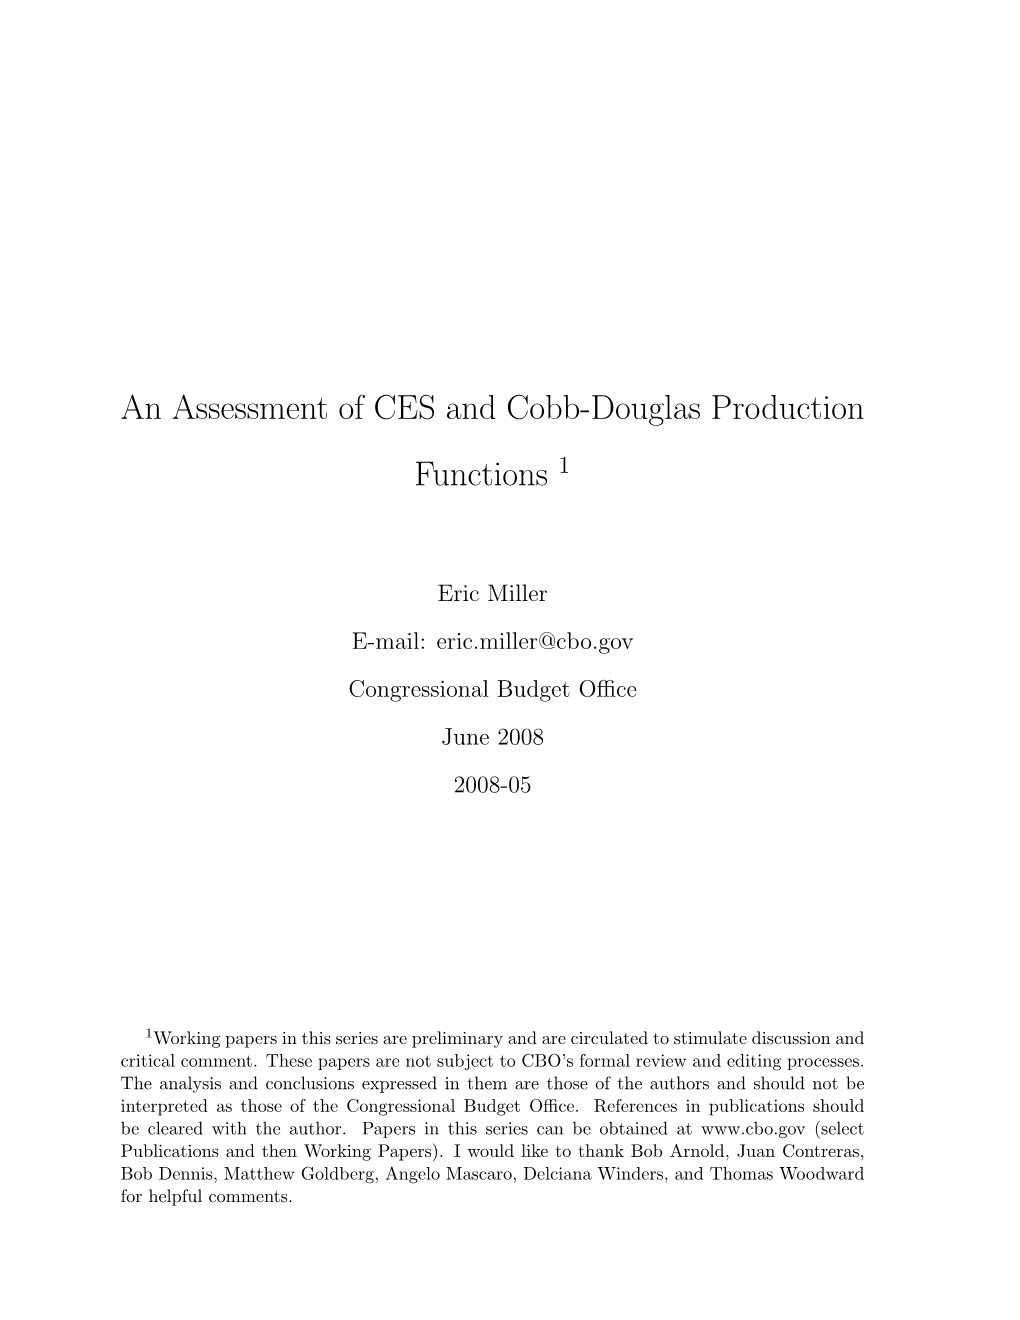 An Assessment of CES and Cobbs-Douglas Production Functions